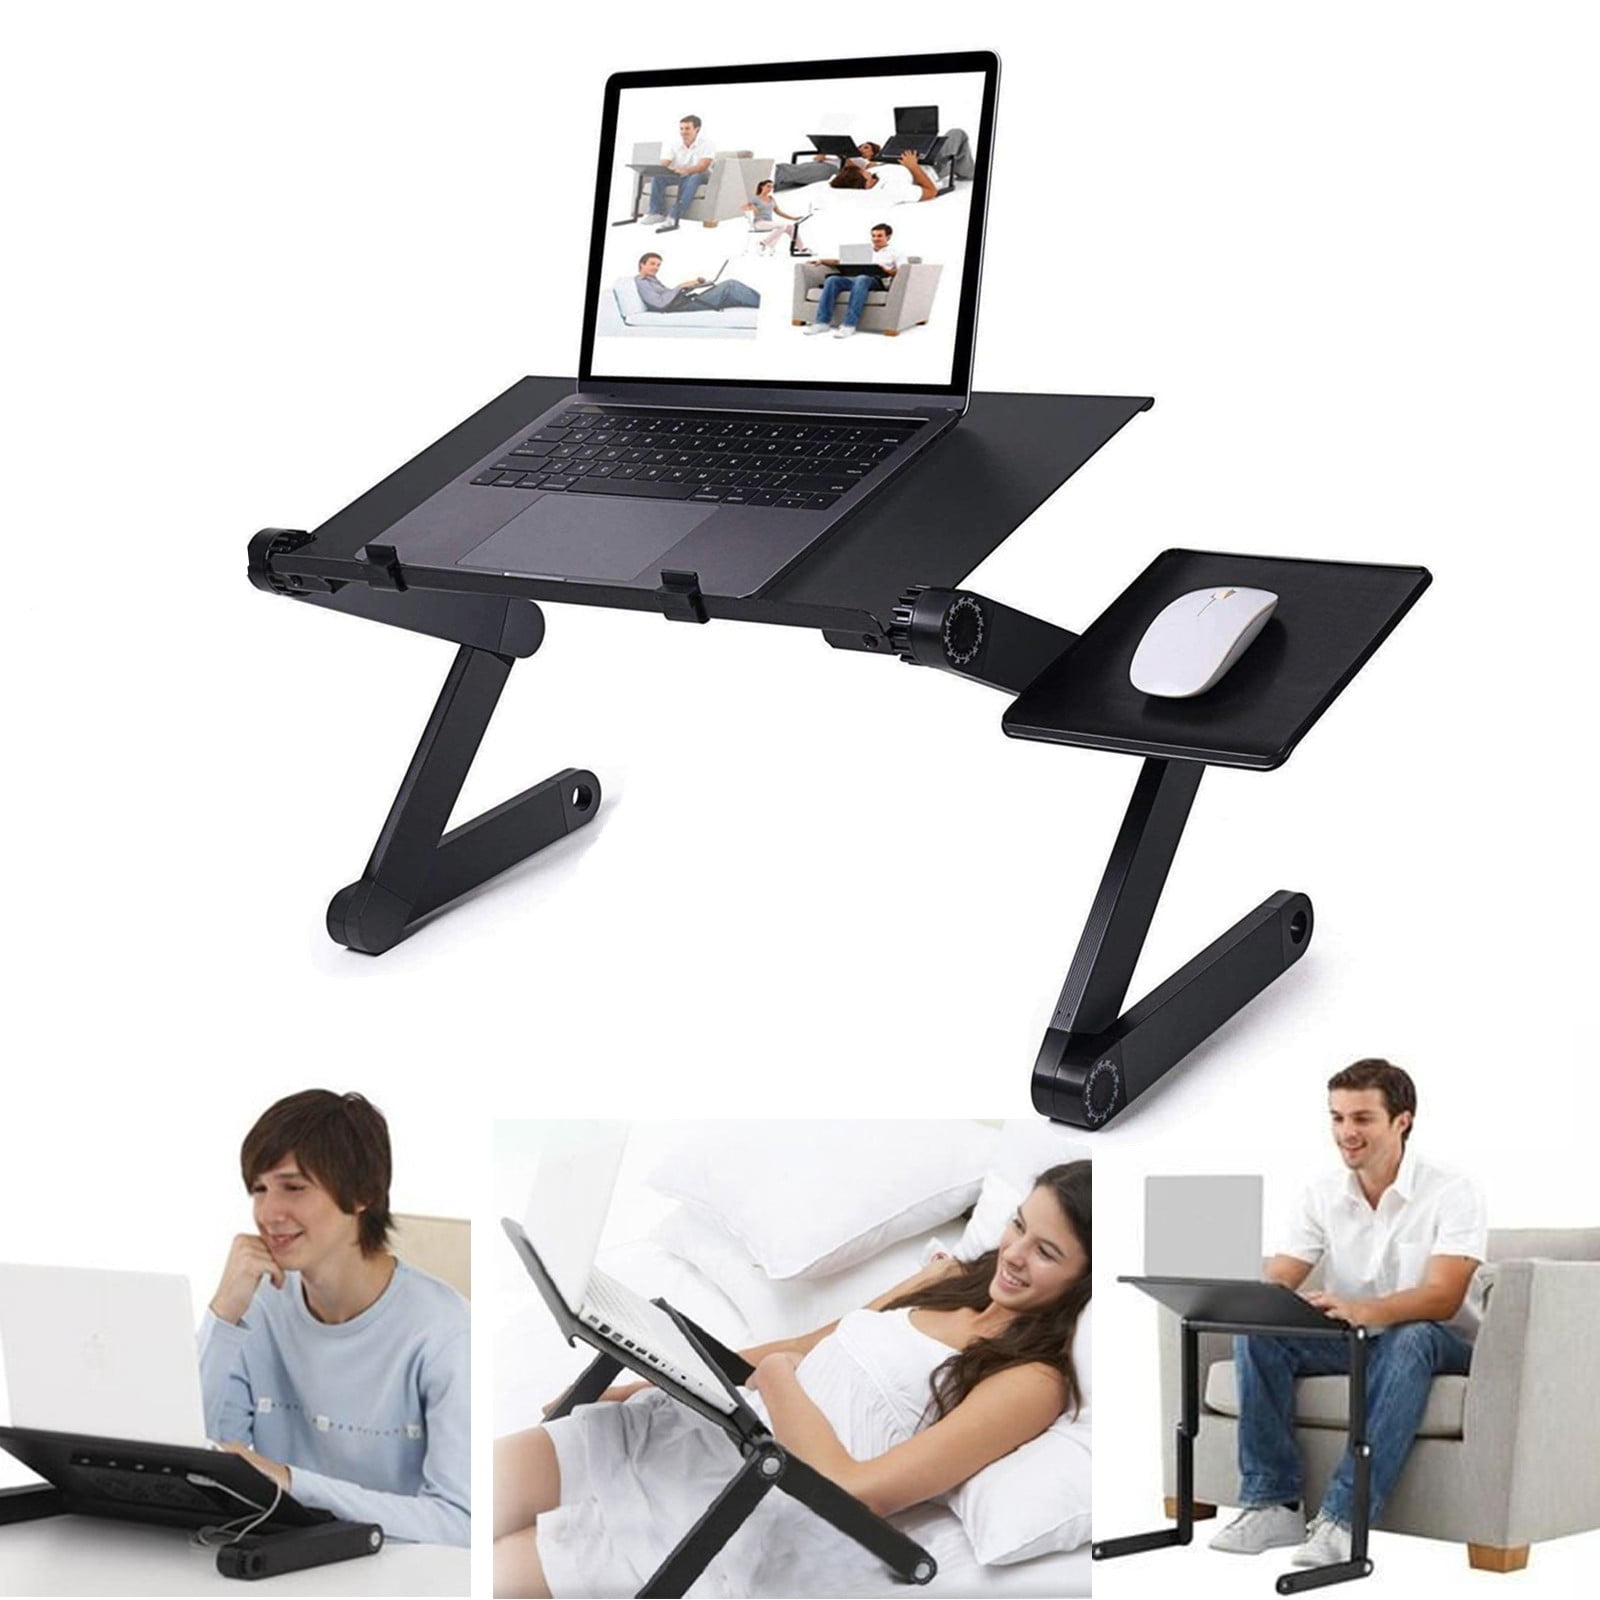 360°Degree Foldable Laptop Desk Lap Table Bed Pad Tray Computer Stand Adjustable 